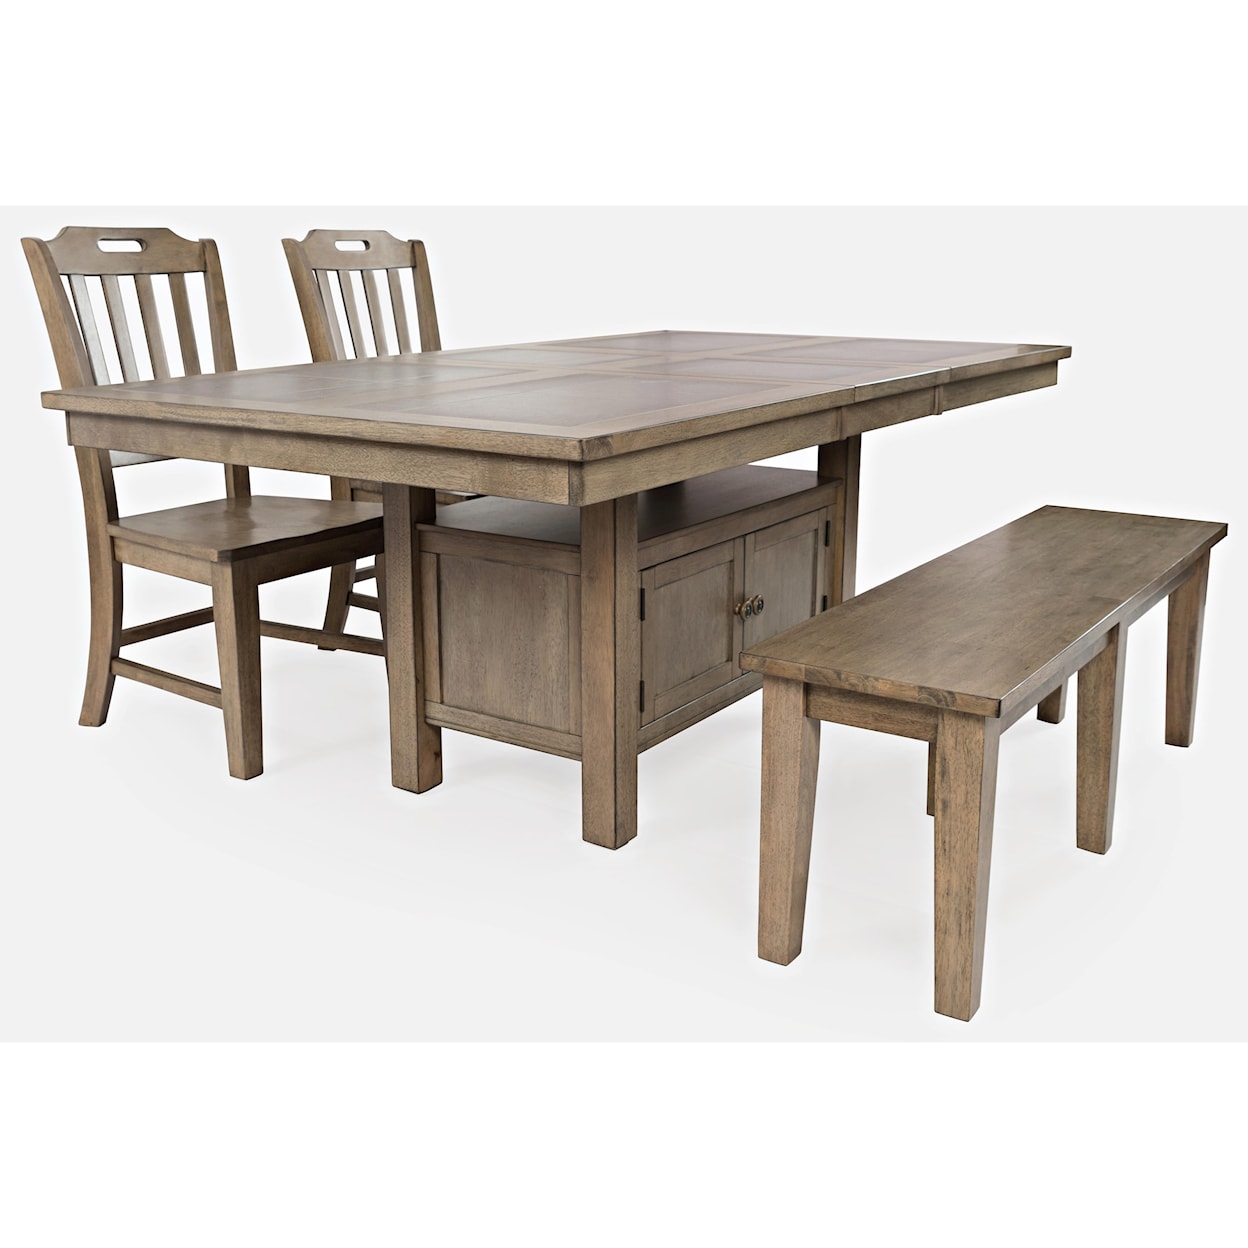 Jofran Prescott Park 4-Piece Dining Table and Chair Set